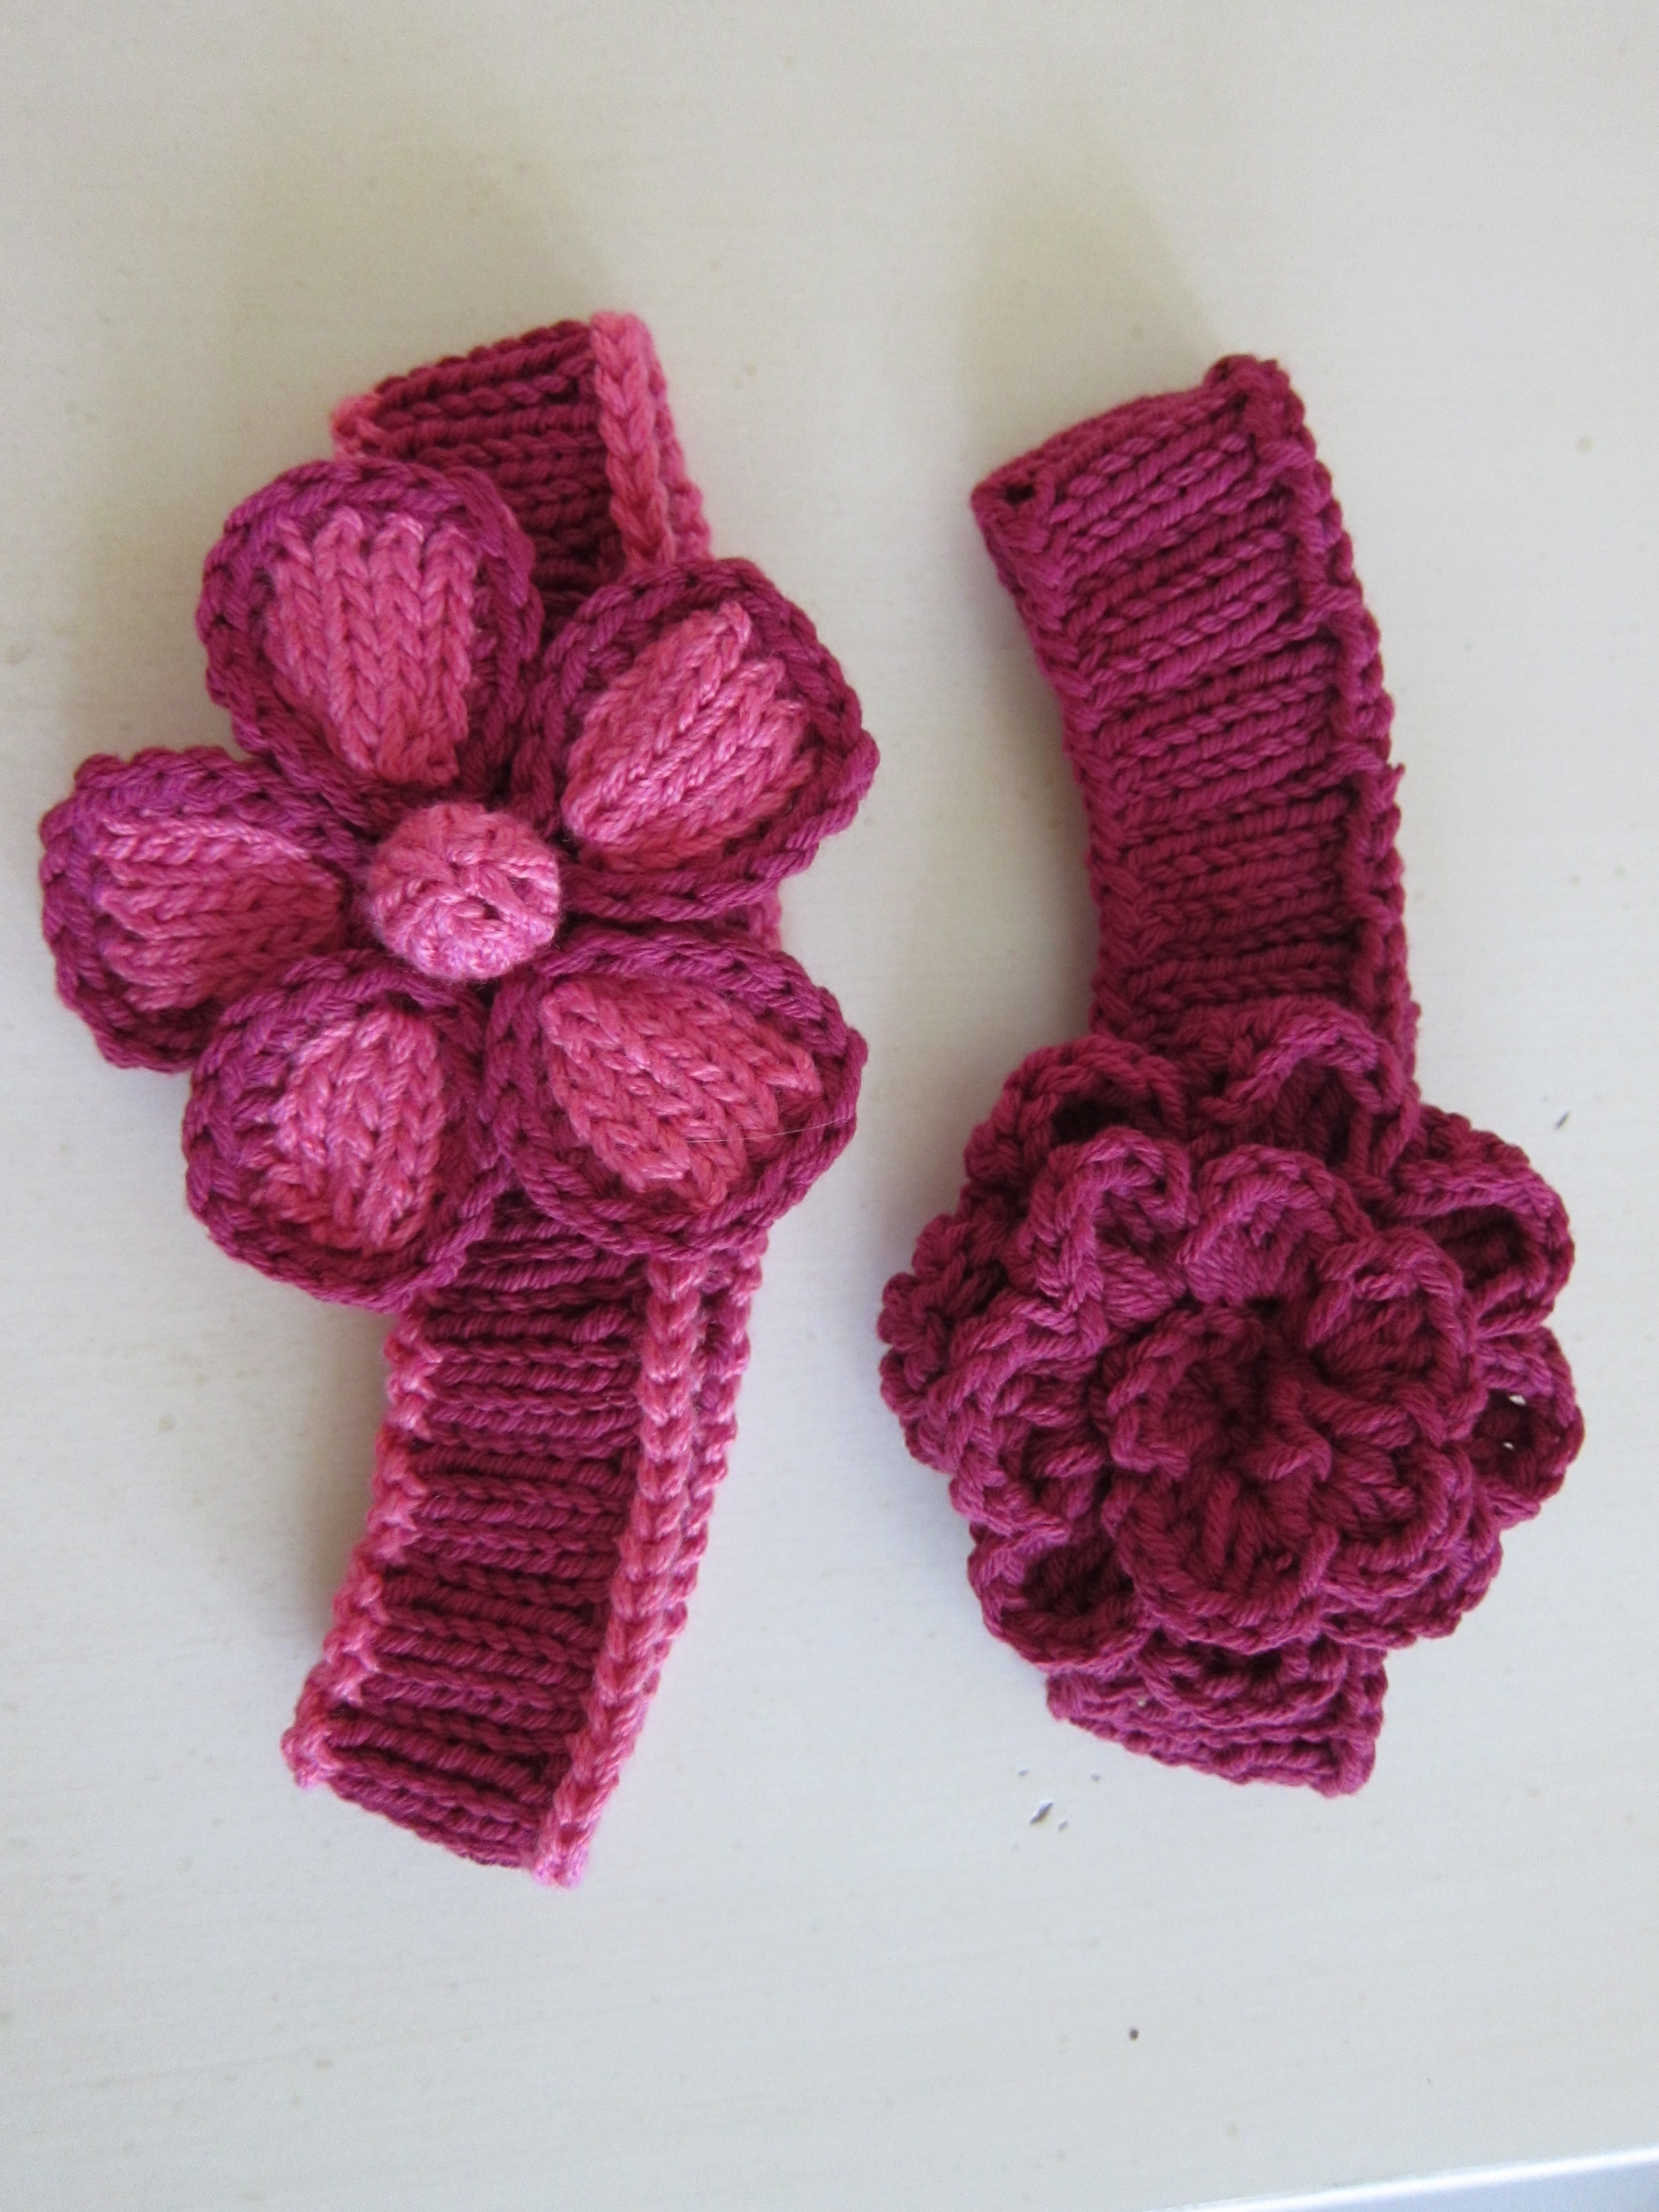 Knitted Flower Patterns Free 8 Knitted Headband With Flower Patterns The Funky Stitch